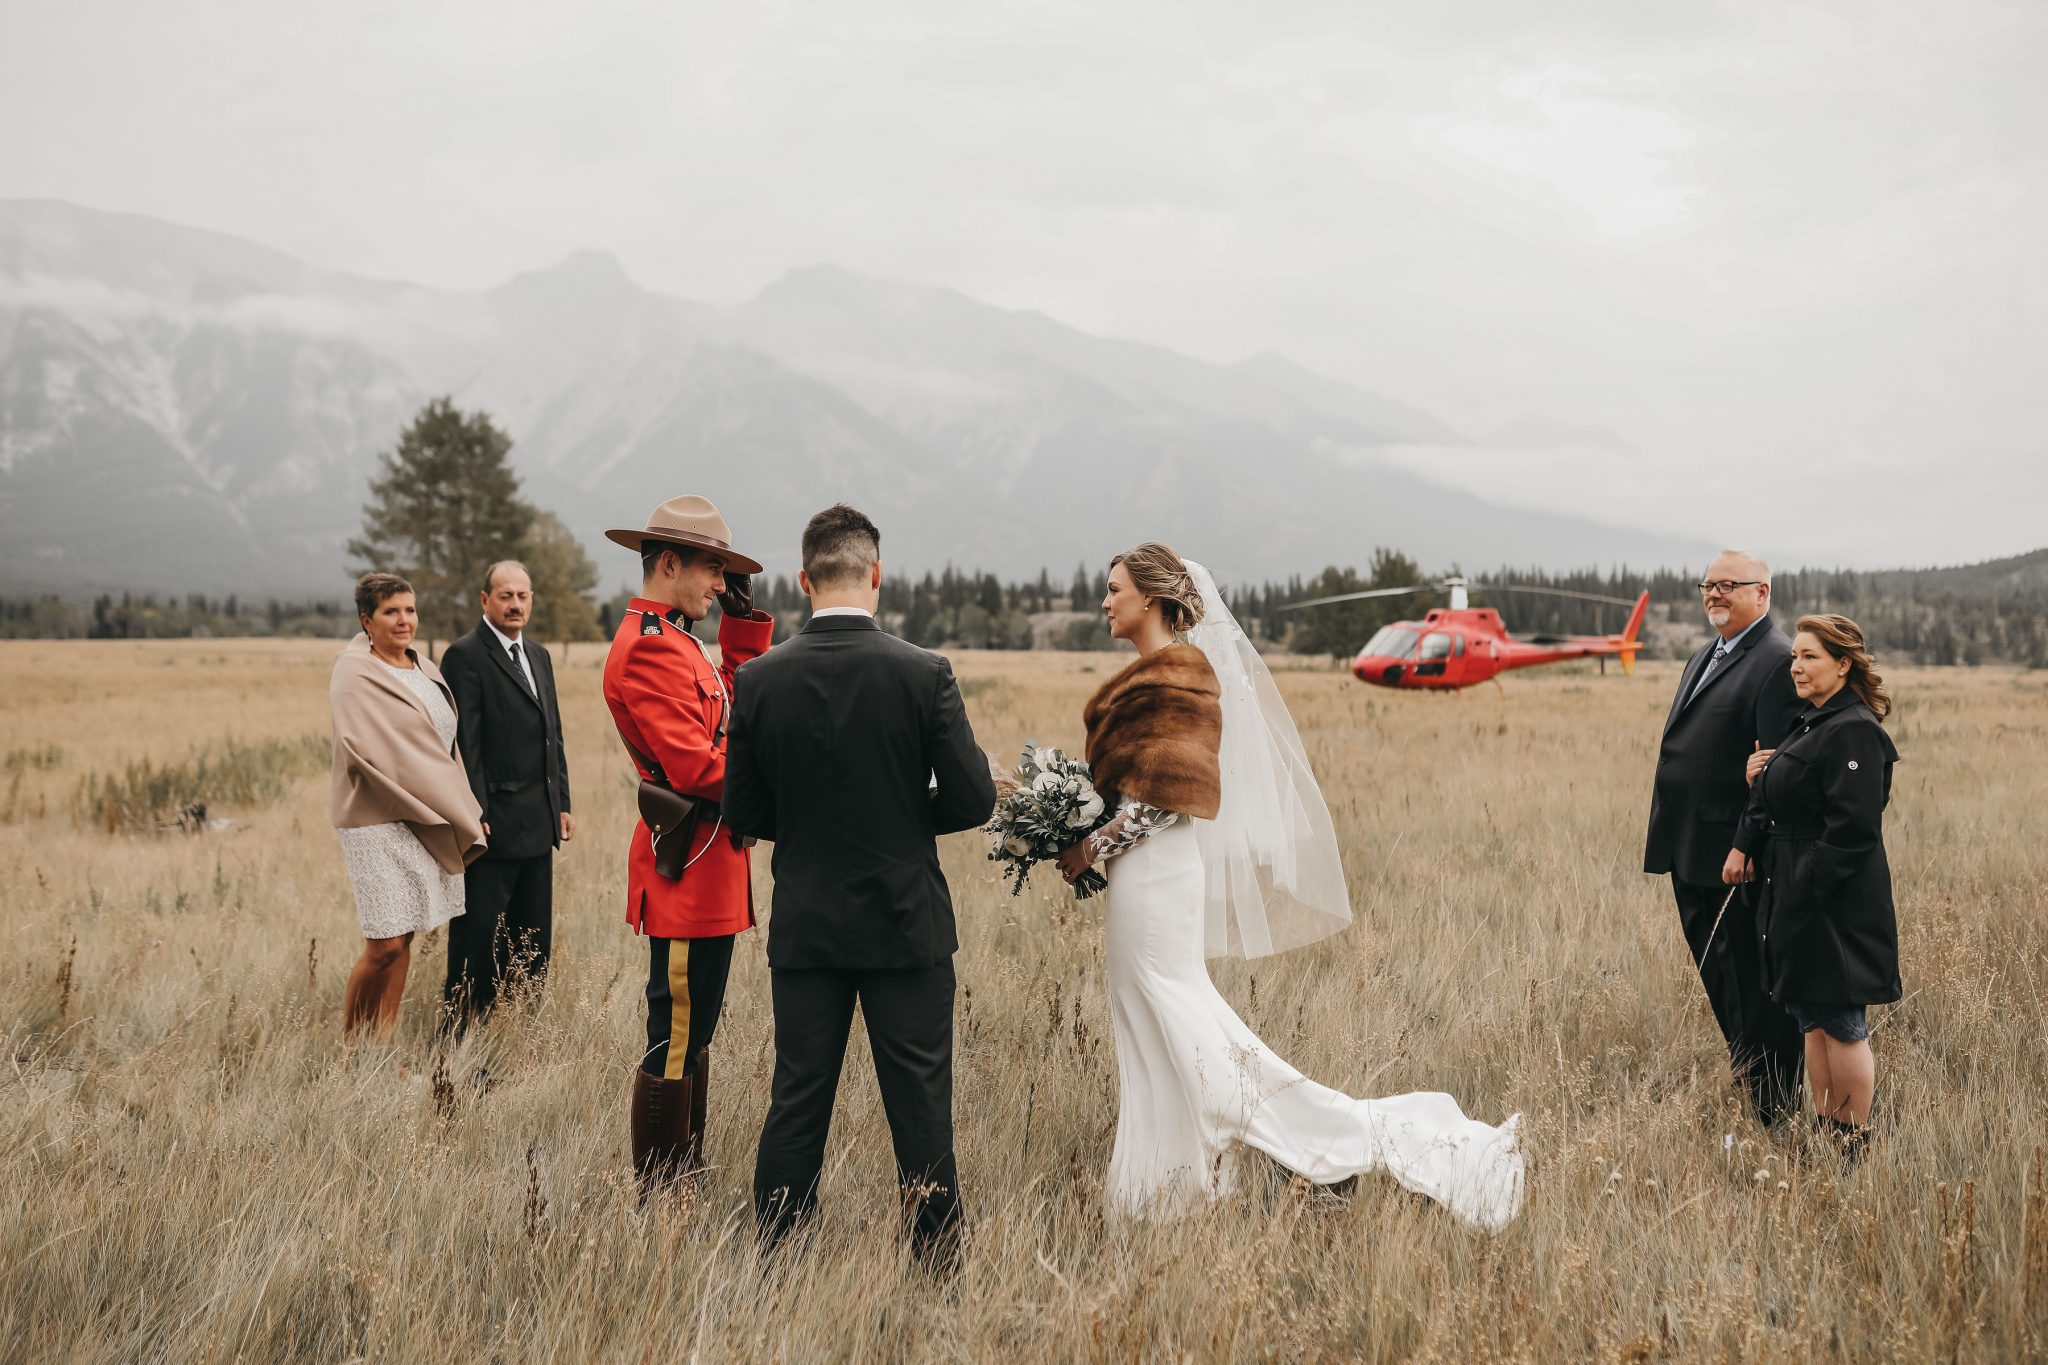 Elopement Advice: 5 Tips To Help You Plan Your Perfect Elopement